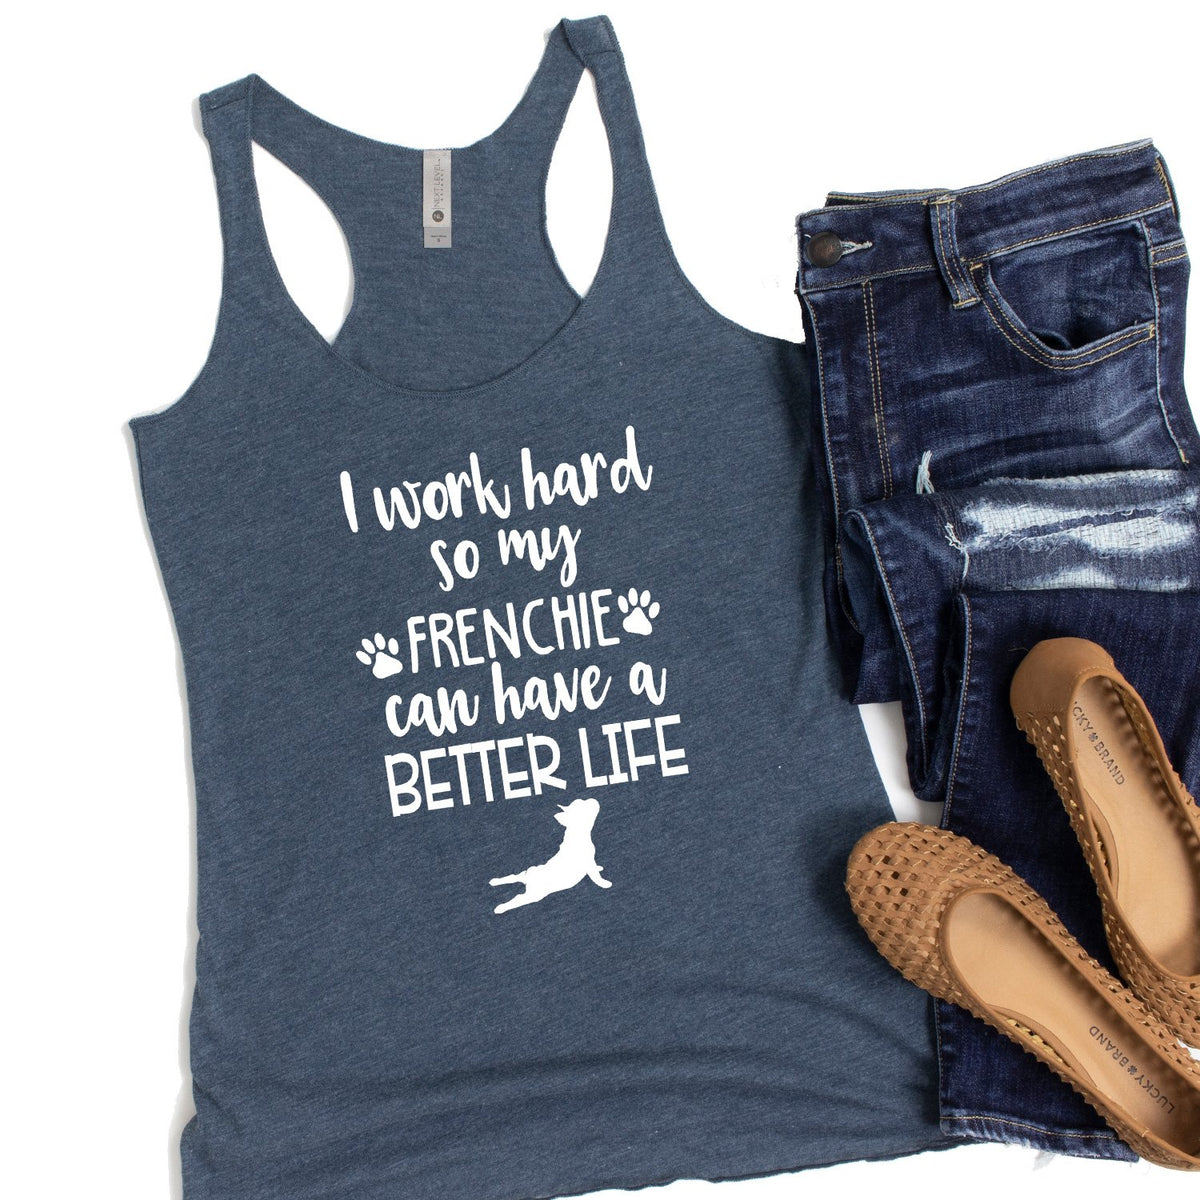 I Work Hard So My Frenchie Can Have A Better Life - Tank Top Racerback